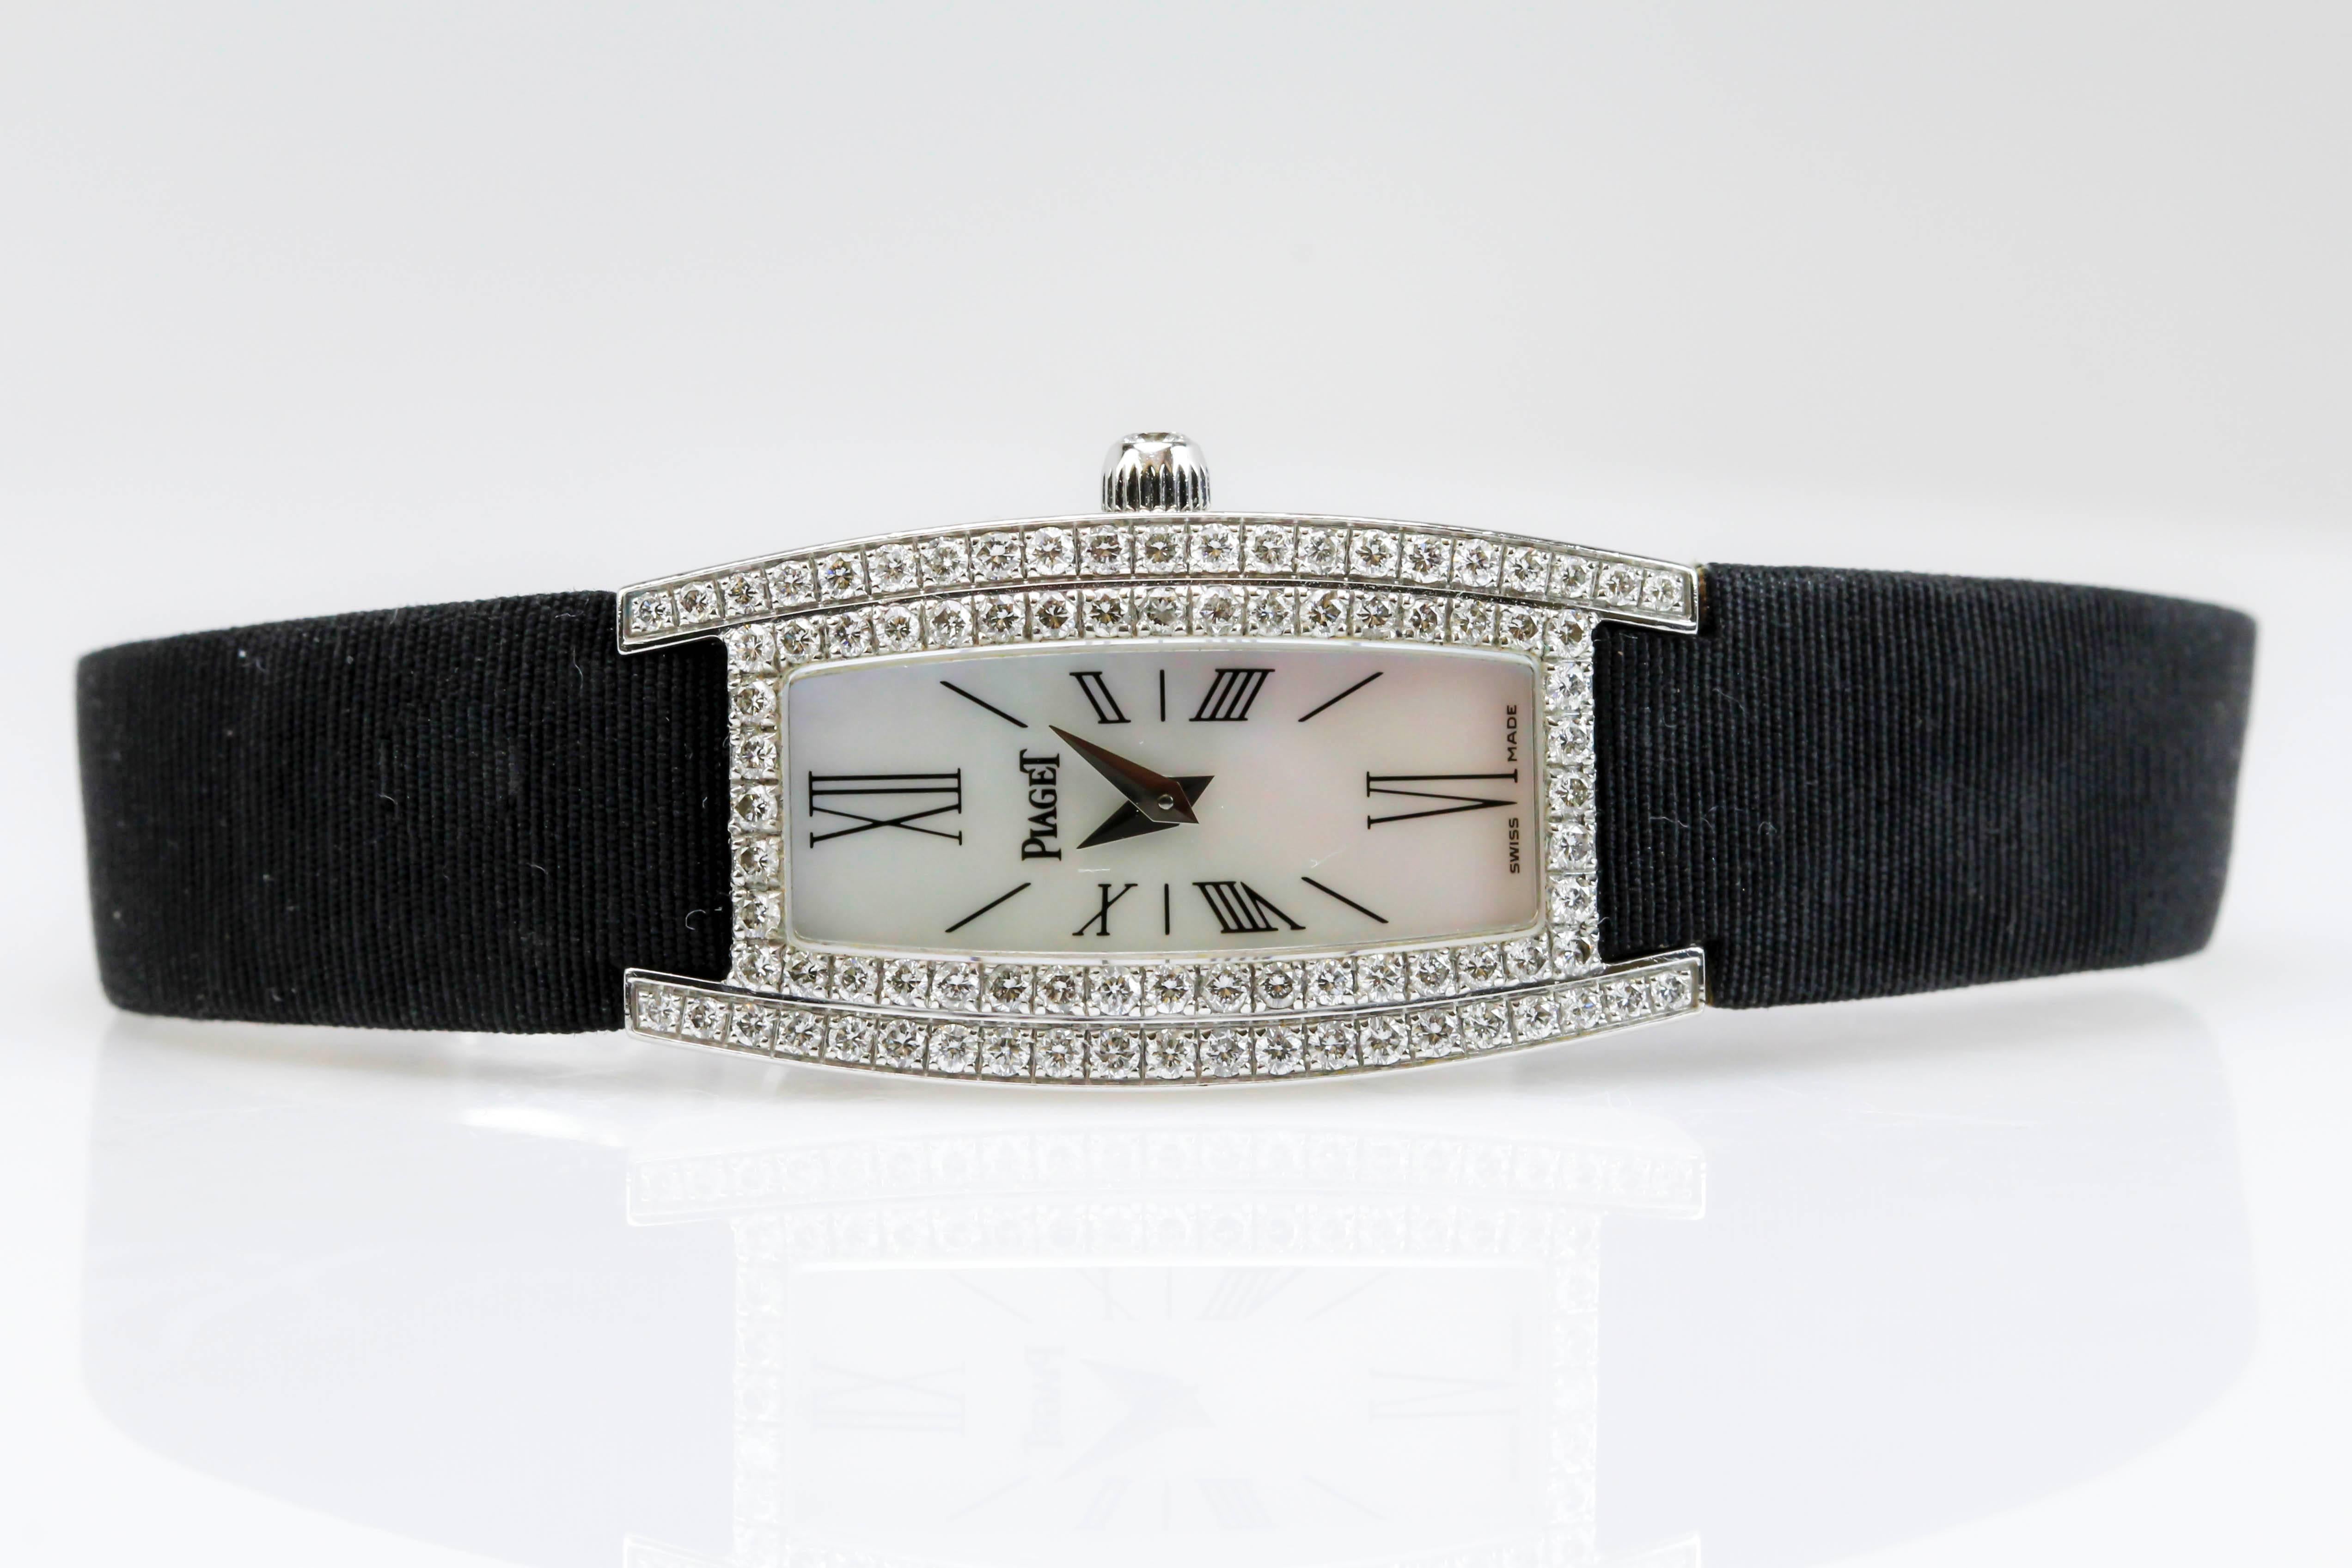 This is an elegant,Piaget Limelight reference 54035 with a tonneau-shaped, curved, 18K white gold, mother of pearl, diamond lady's quartz wristwatch with a silk black strap and white gold/diamond deployant clasp. 